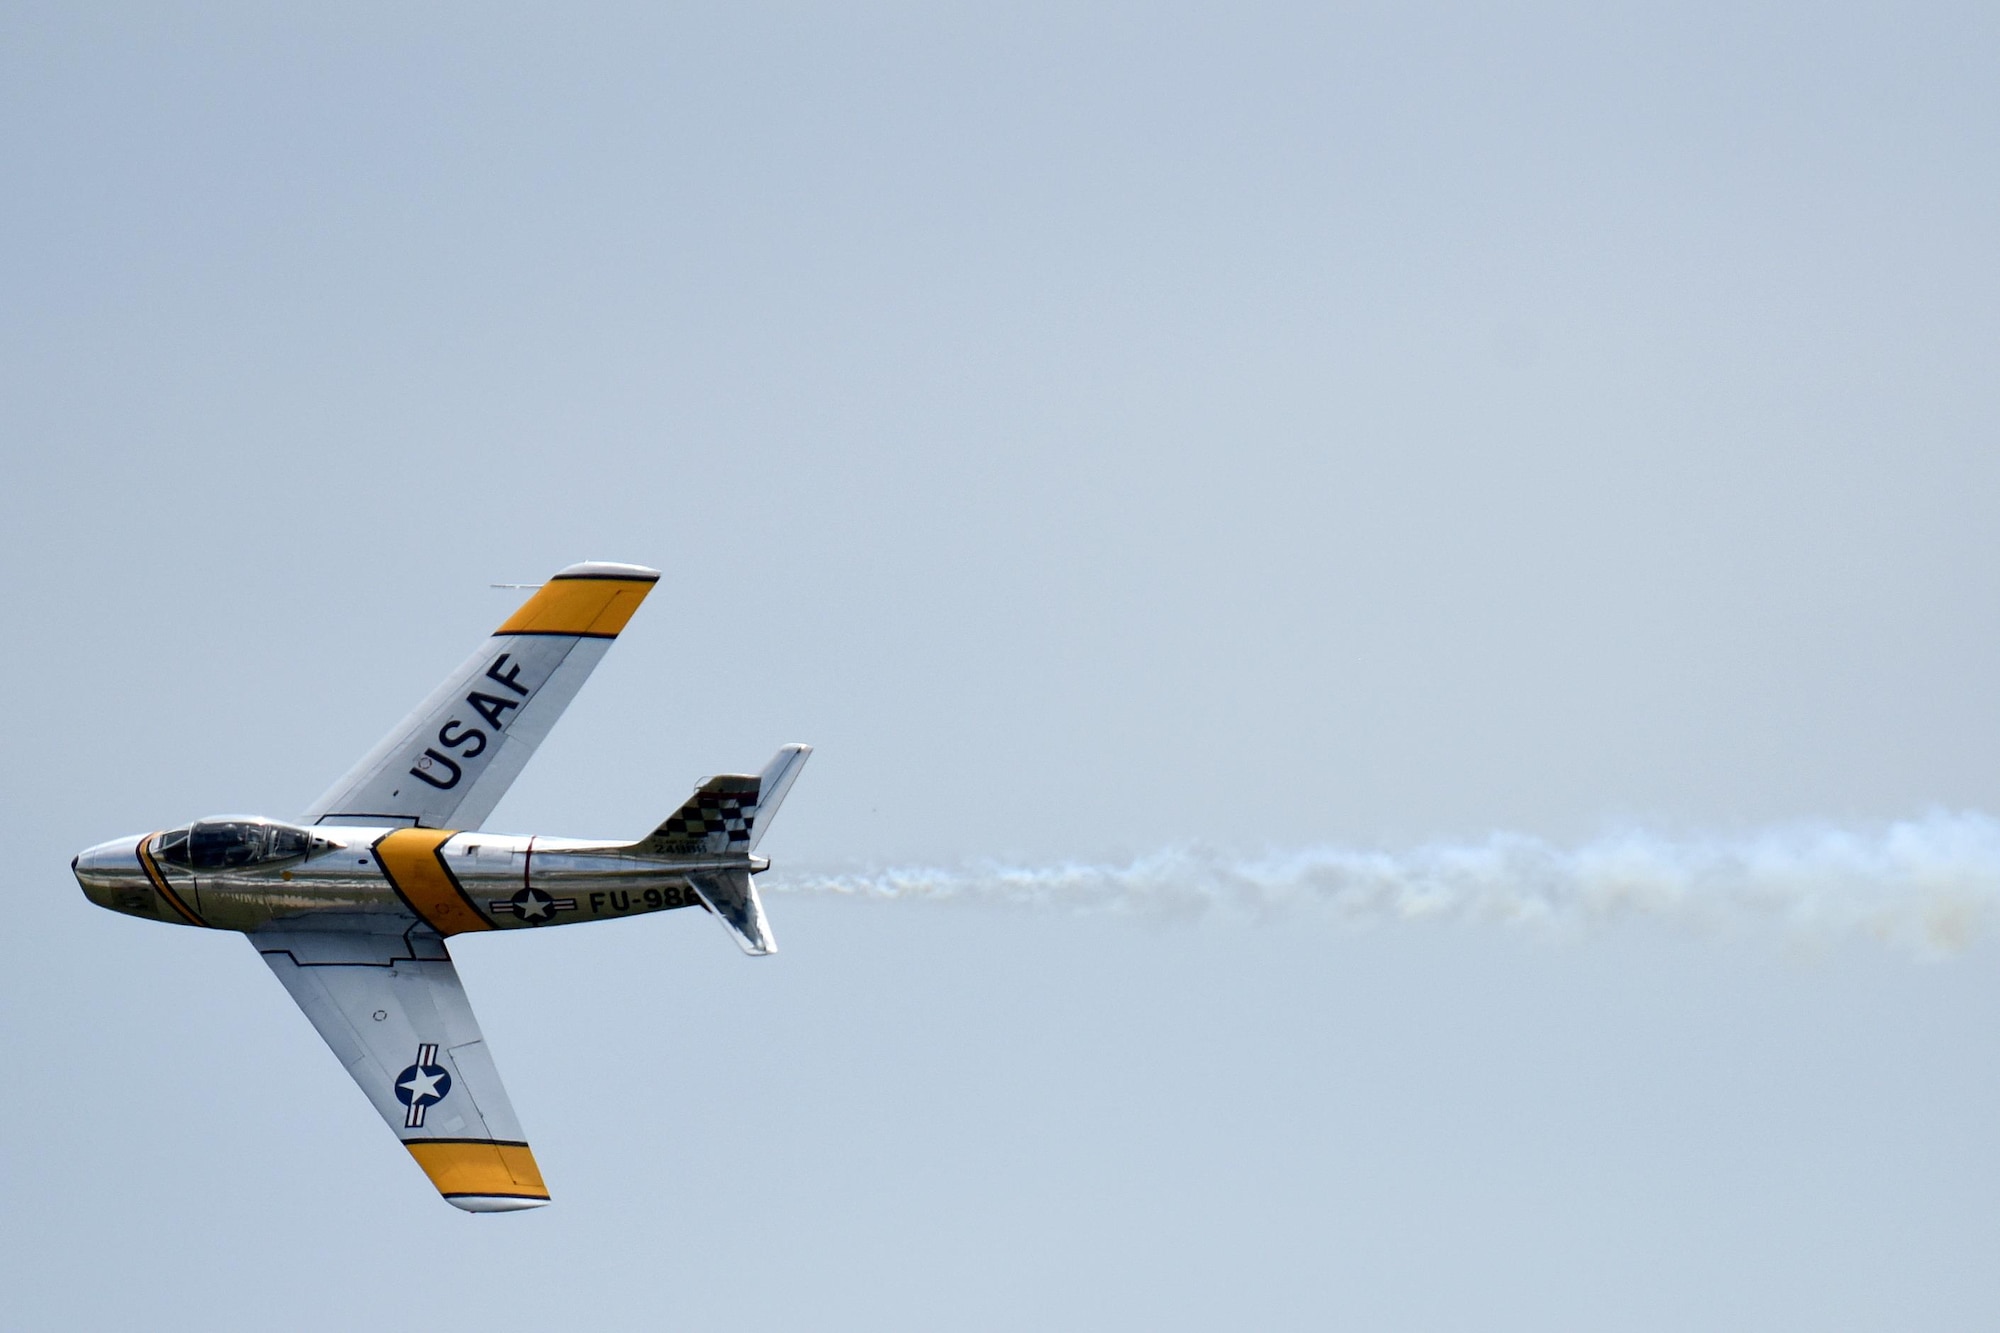 An F-86 Sabre flies during the Wings Over Wayne Air Show, May 21, 2017, at Seymour Johnson Air Force Base, North Carolina. The 4th Fighter Wing celebrates its 75th anniversary this year and traces its history back to the Royal Air Force during World War II. (U.S. Air Force photo by Airman 1st Class Miranda Loera)